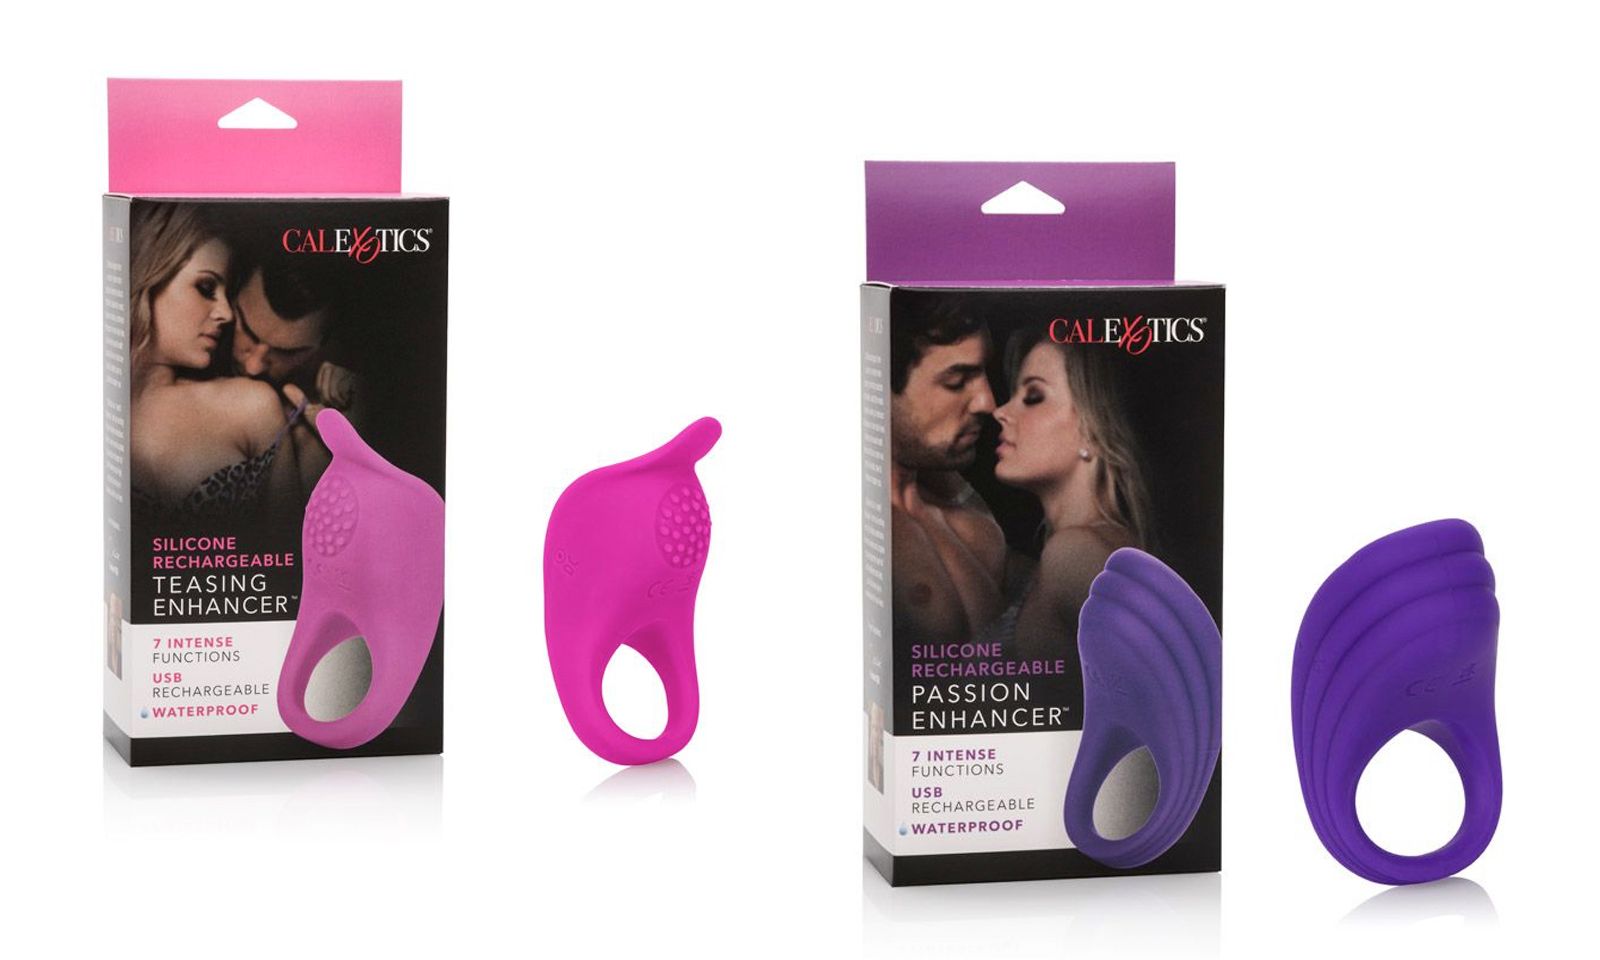 Reignite Romance With New Couples Items From CalExotics